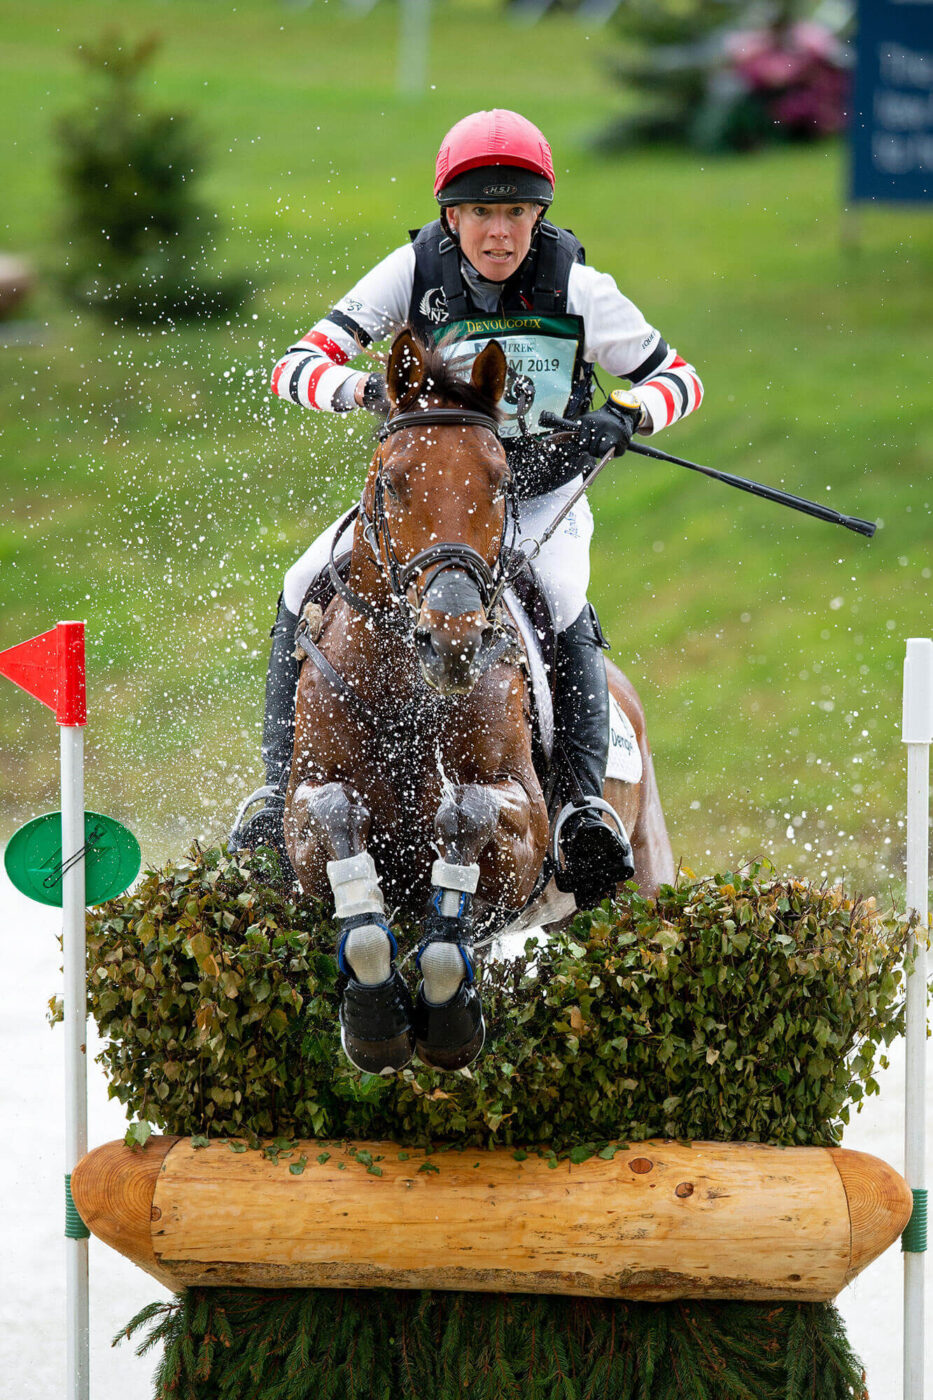 Lucy Jackson and Superstition at Bramham Horse Trials Water Jump